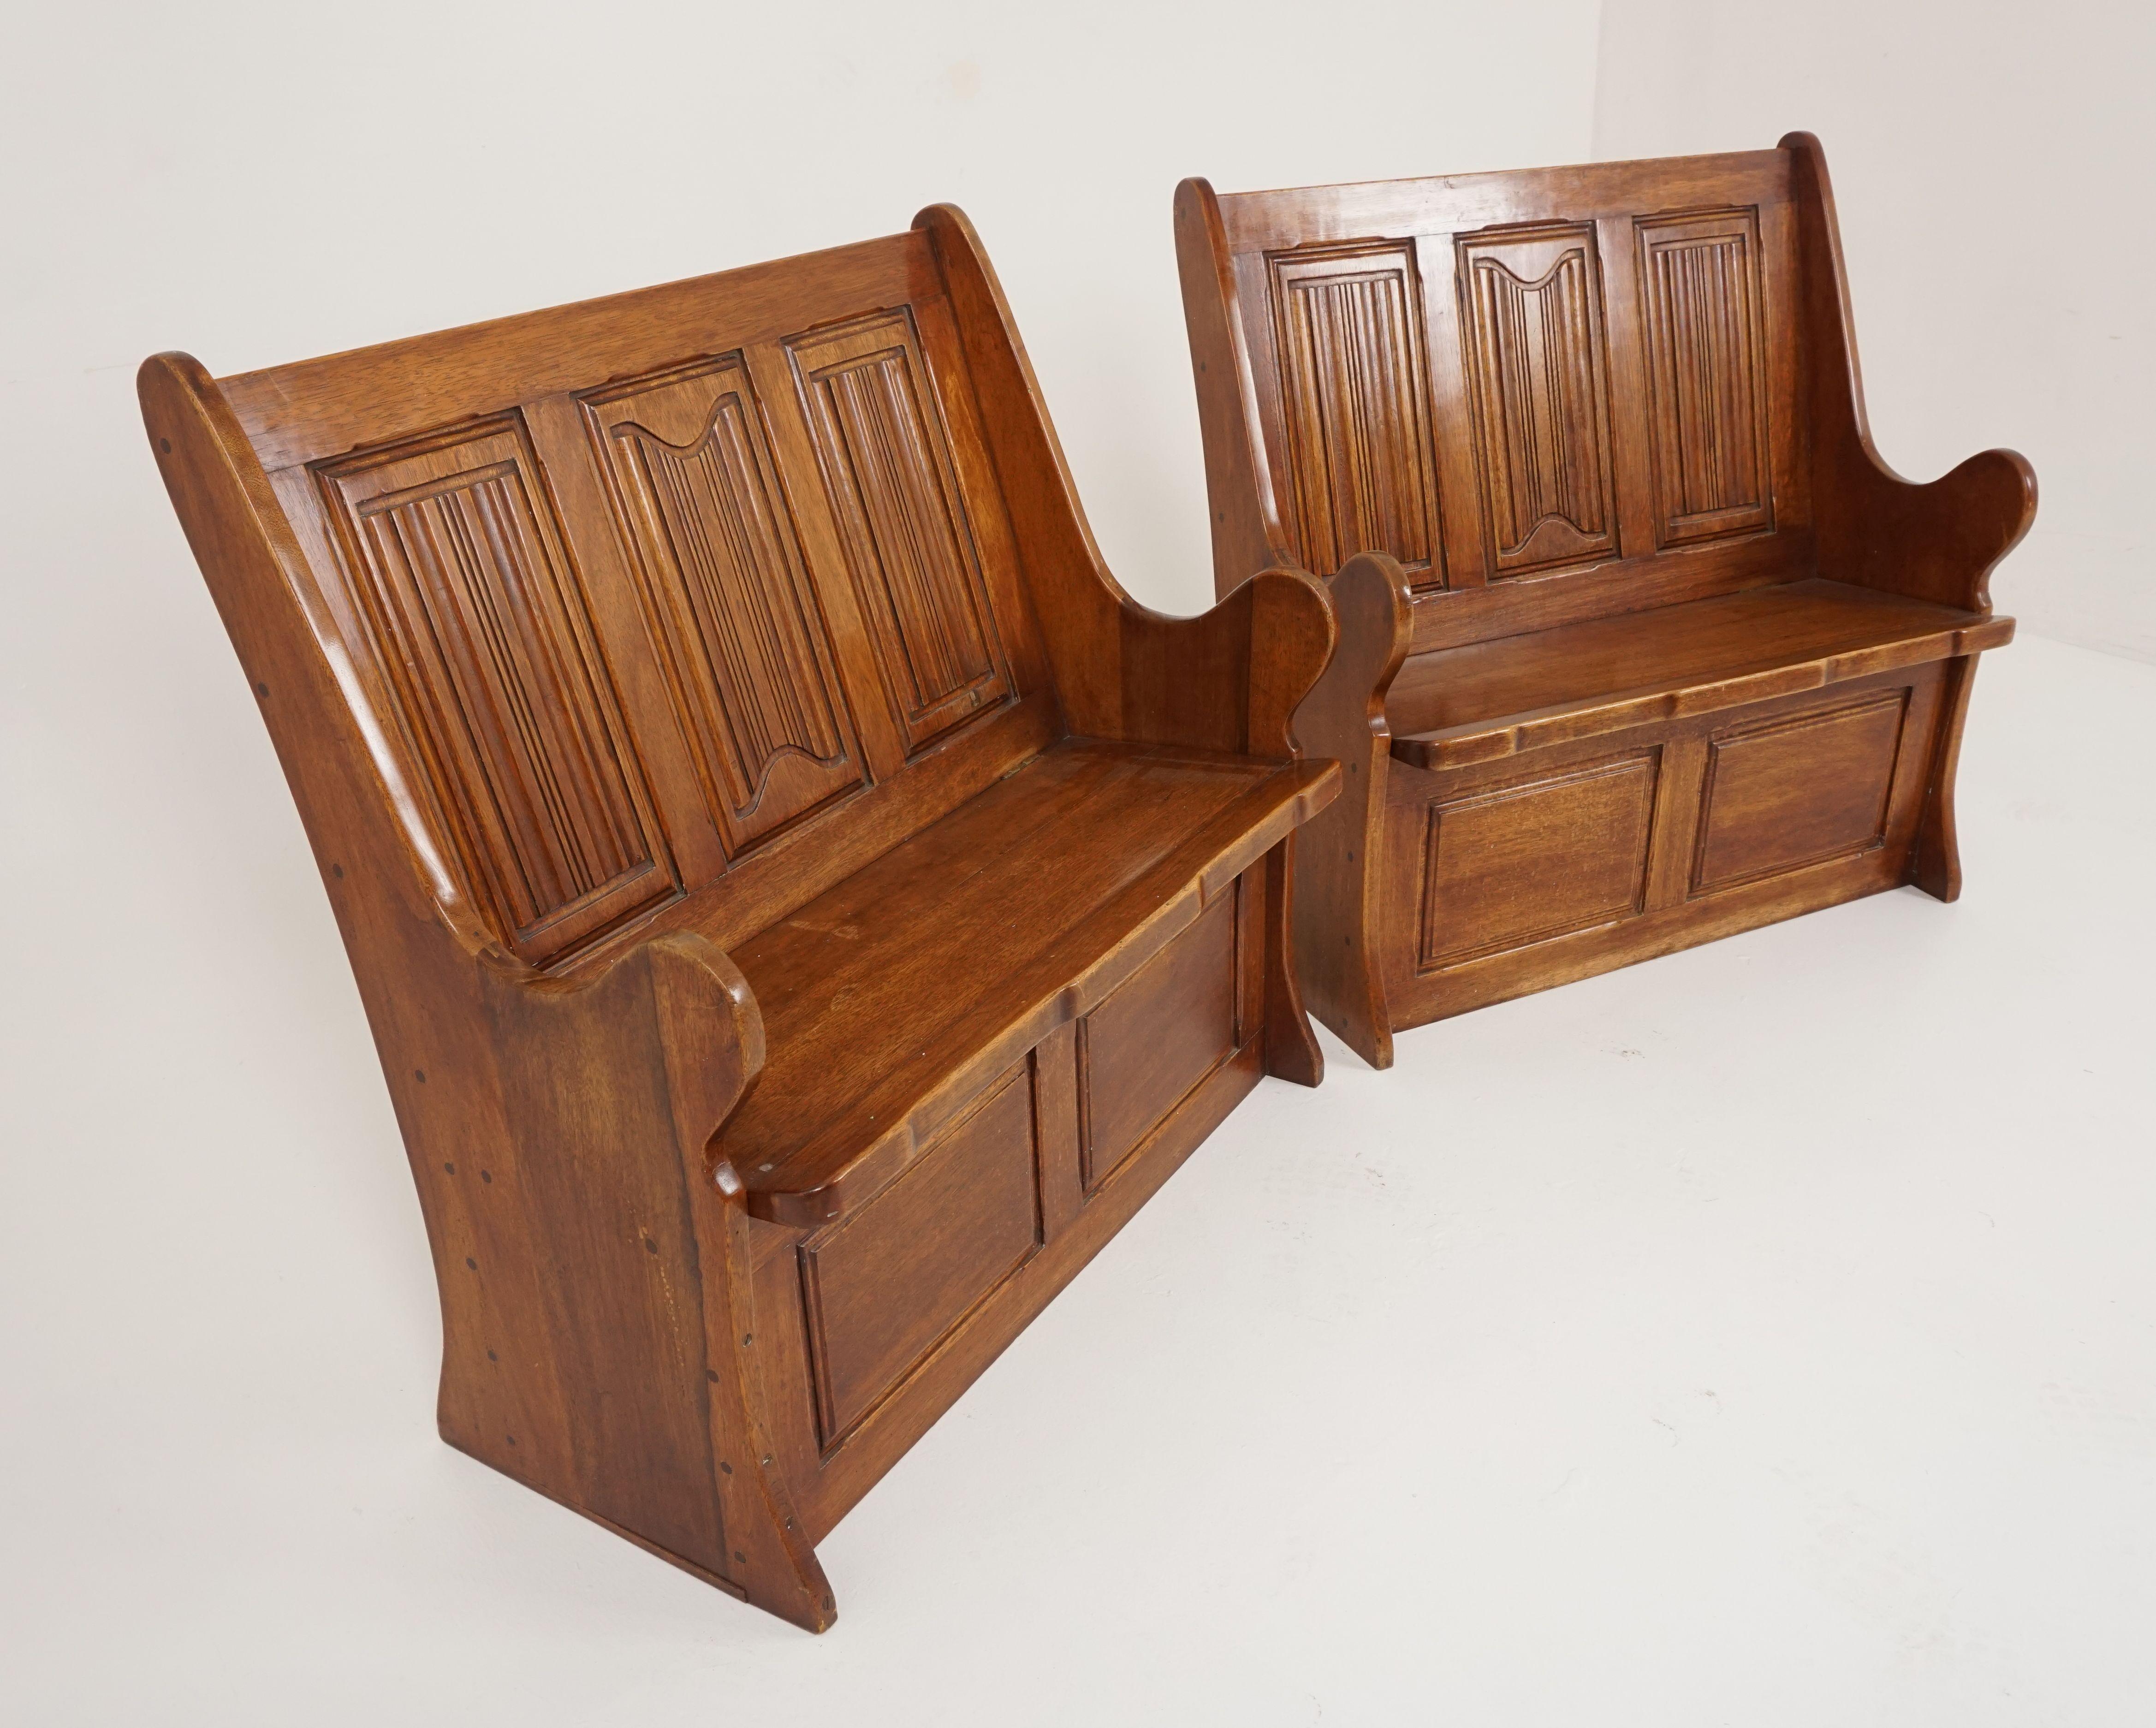 English Pair of Vintage Caved Gothic Style Box Seat Low Benches, England 1950, B2569